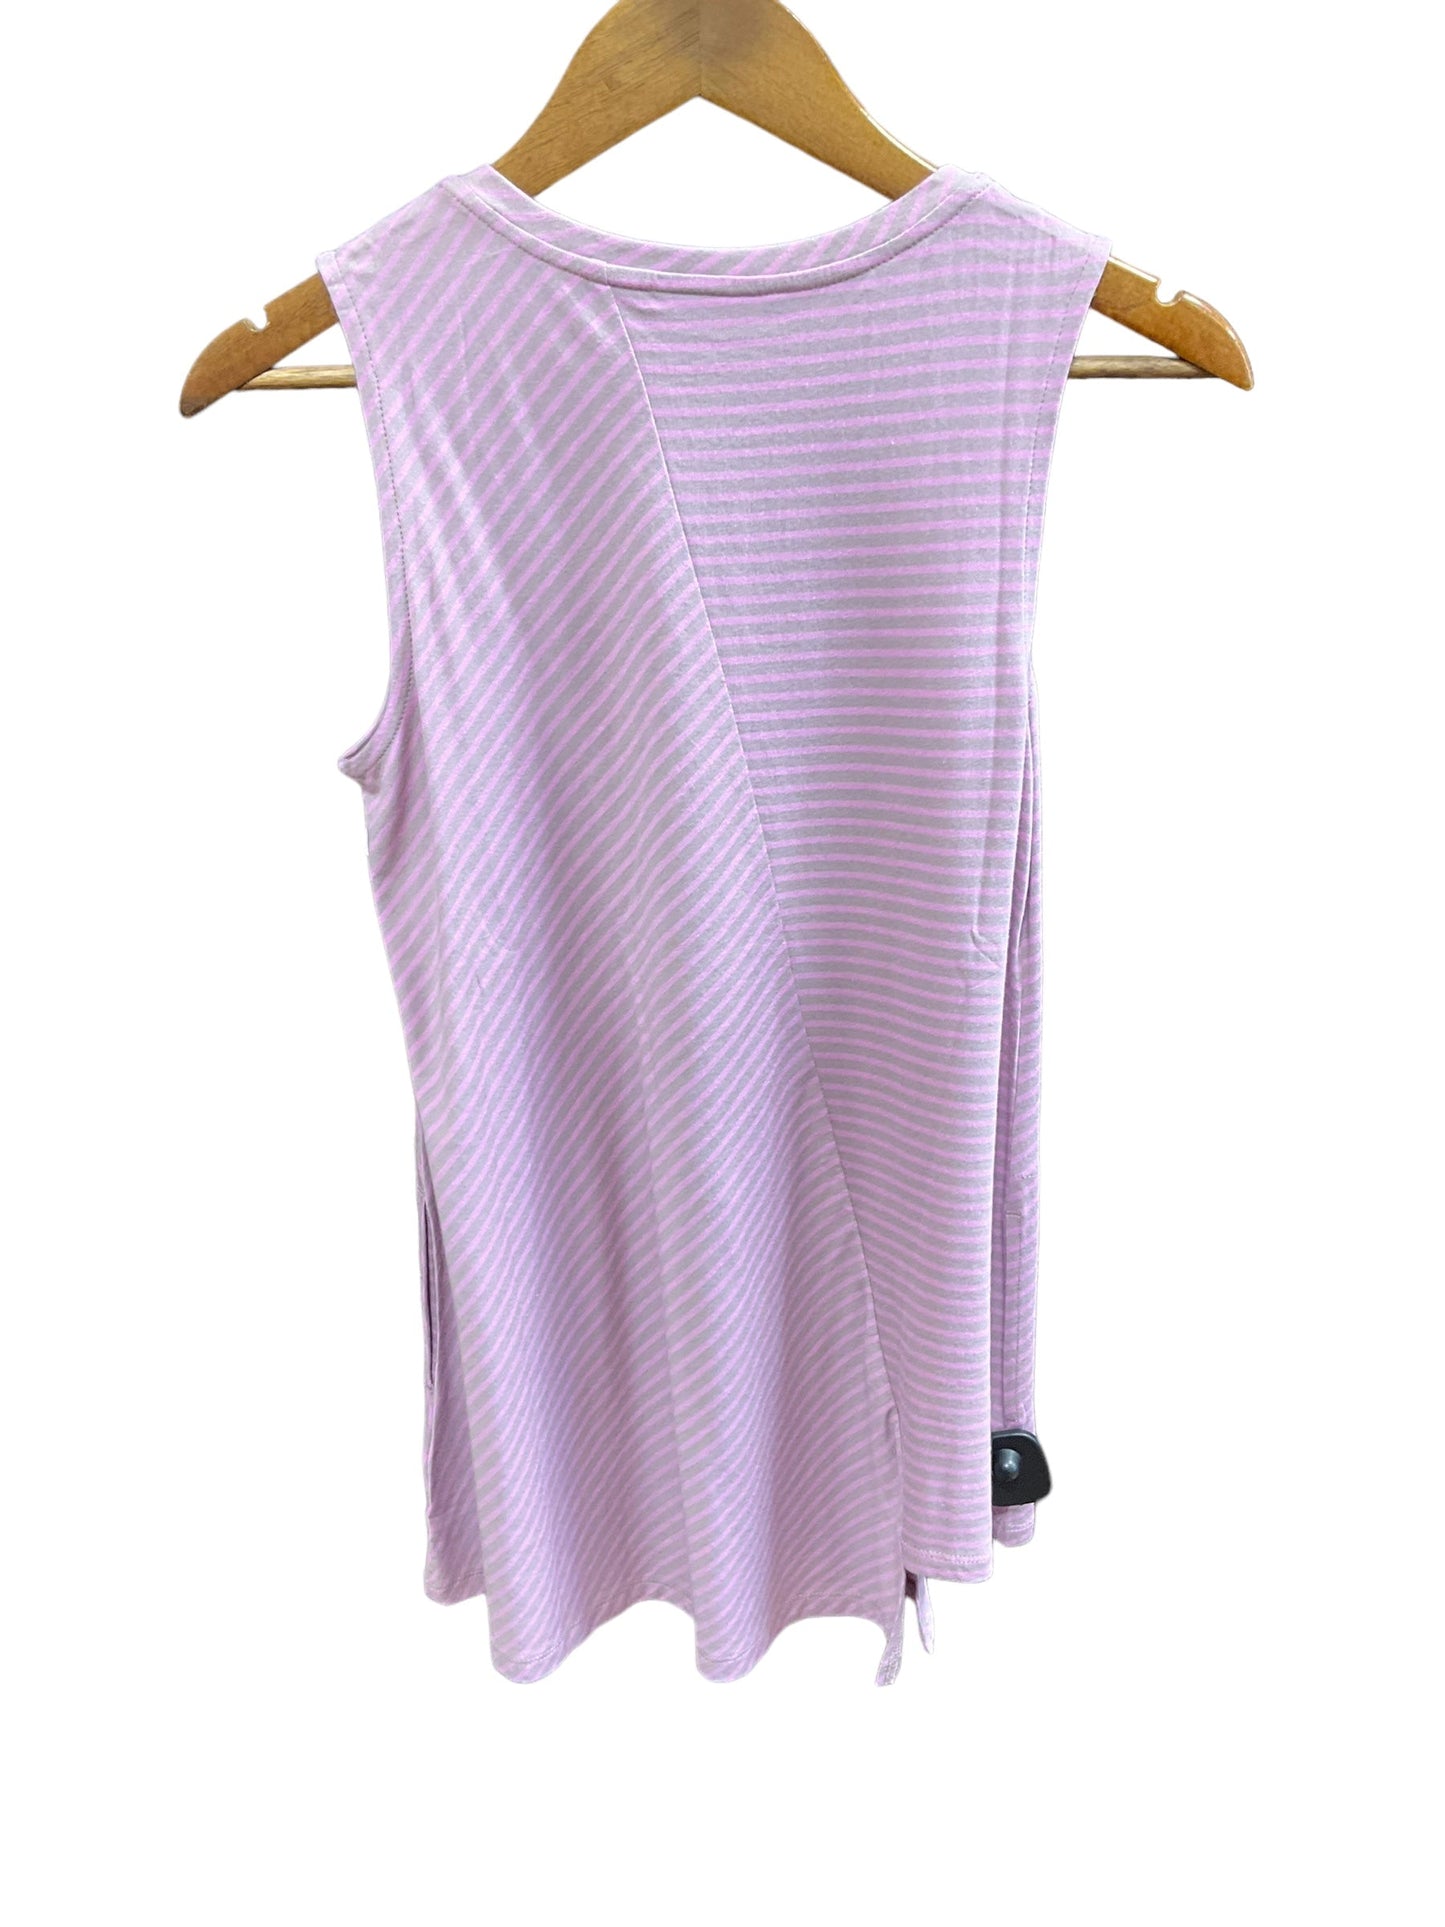 Top Sleeveless By Logo  Size: Xs